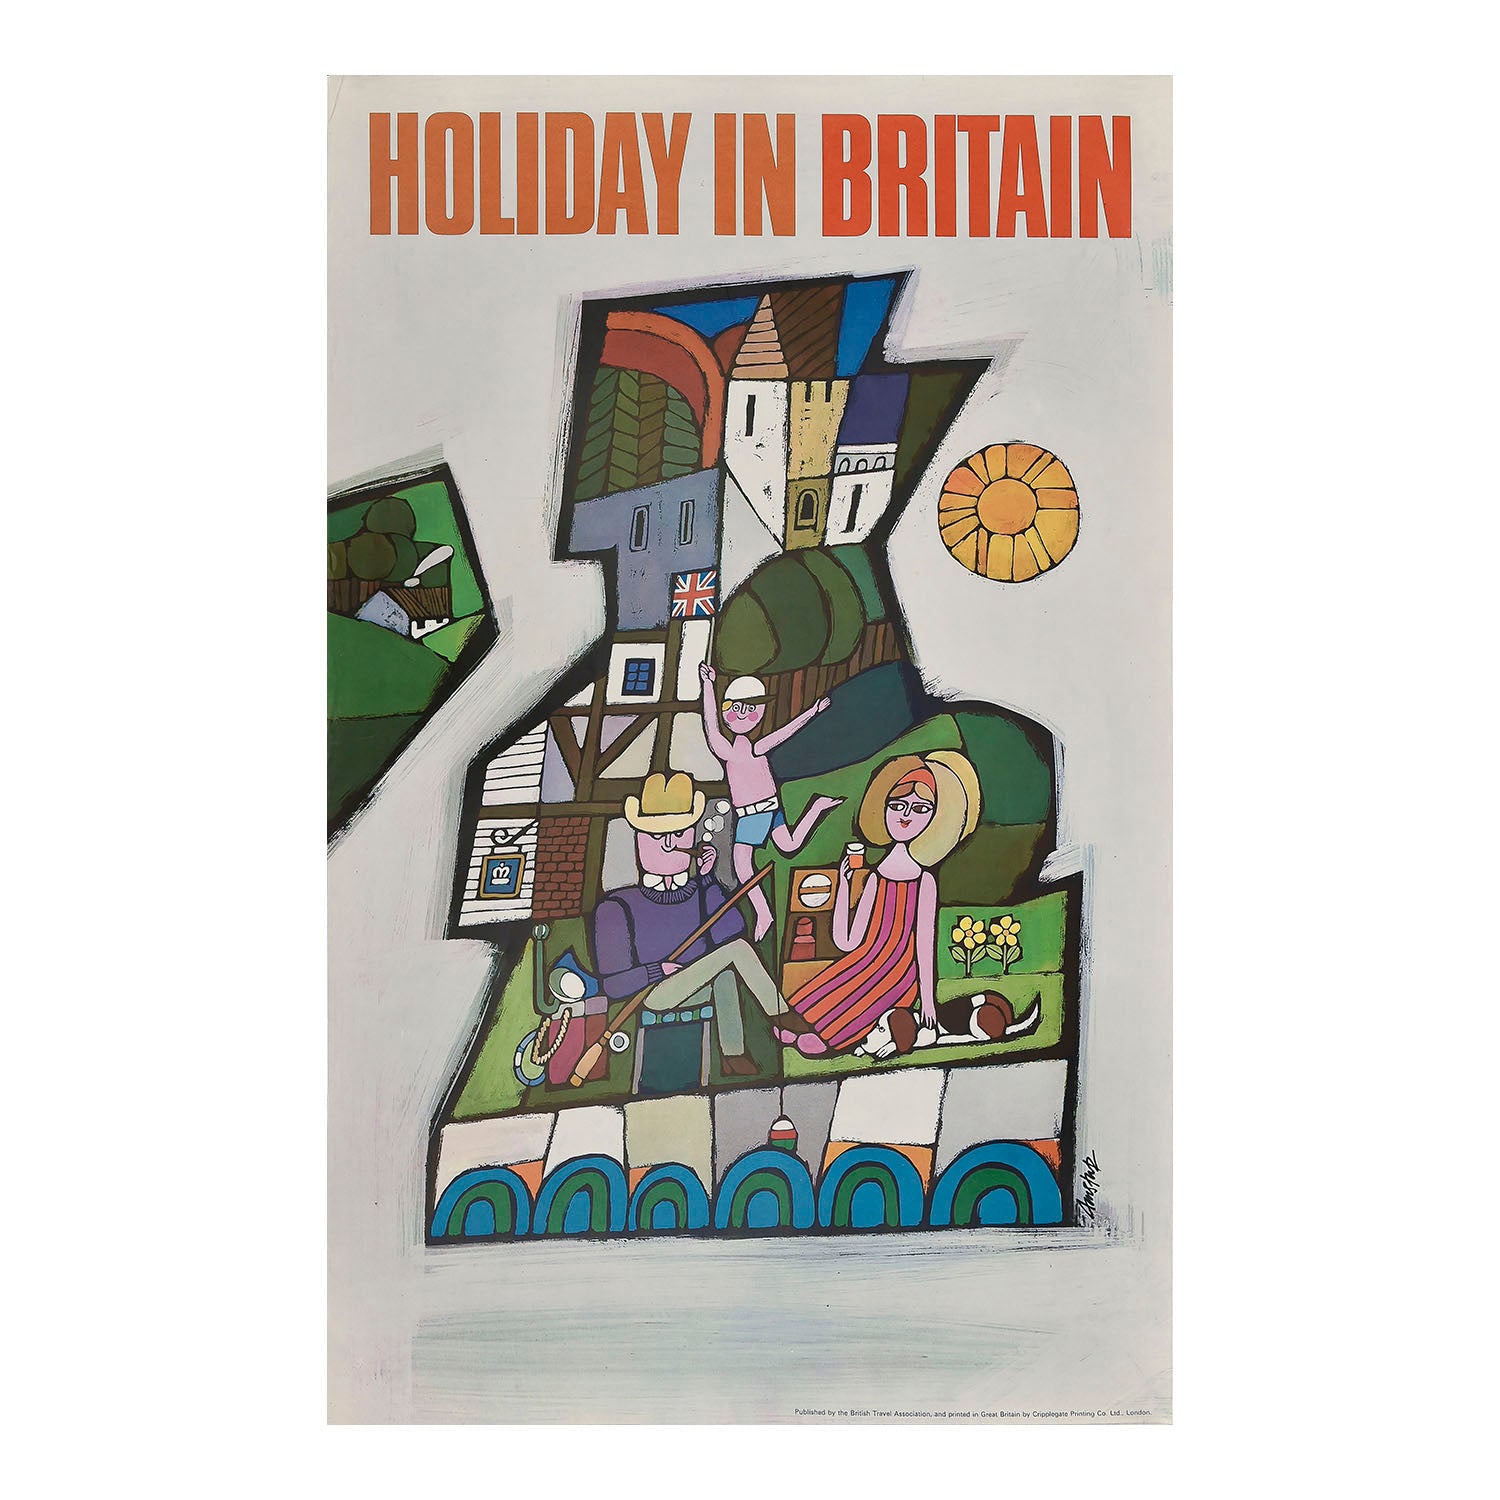 British Travel Association poster, Holidays in Britain, designed by Andre Amstutz. The design features a holidaying family against a background shaped like the British Isles